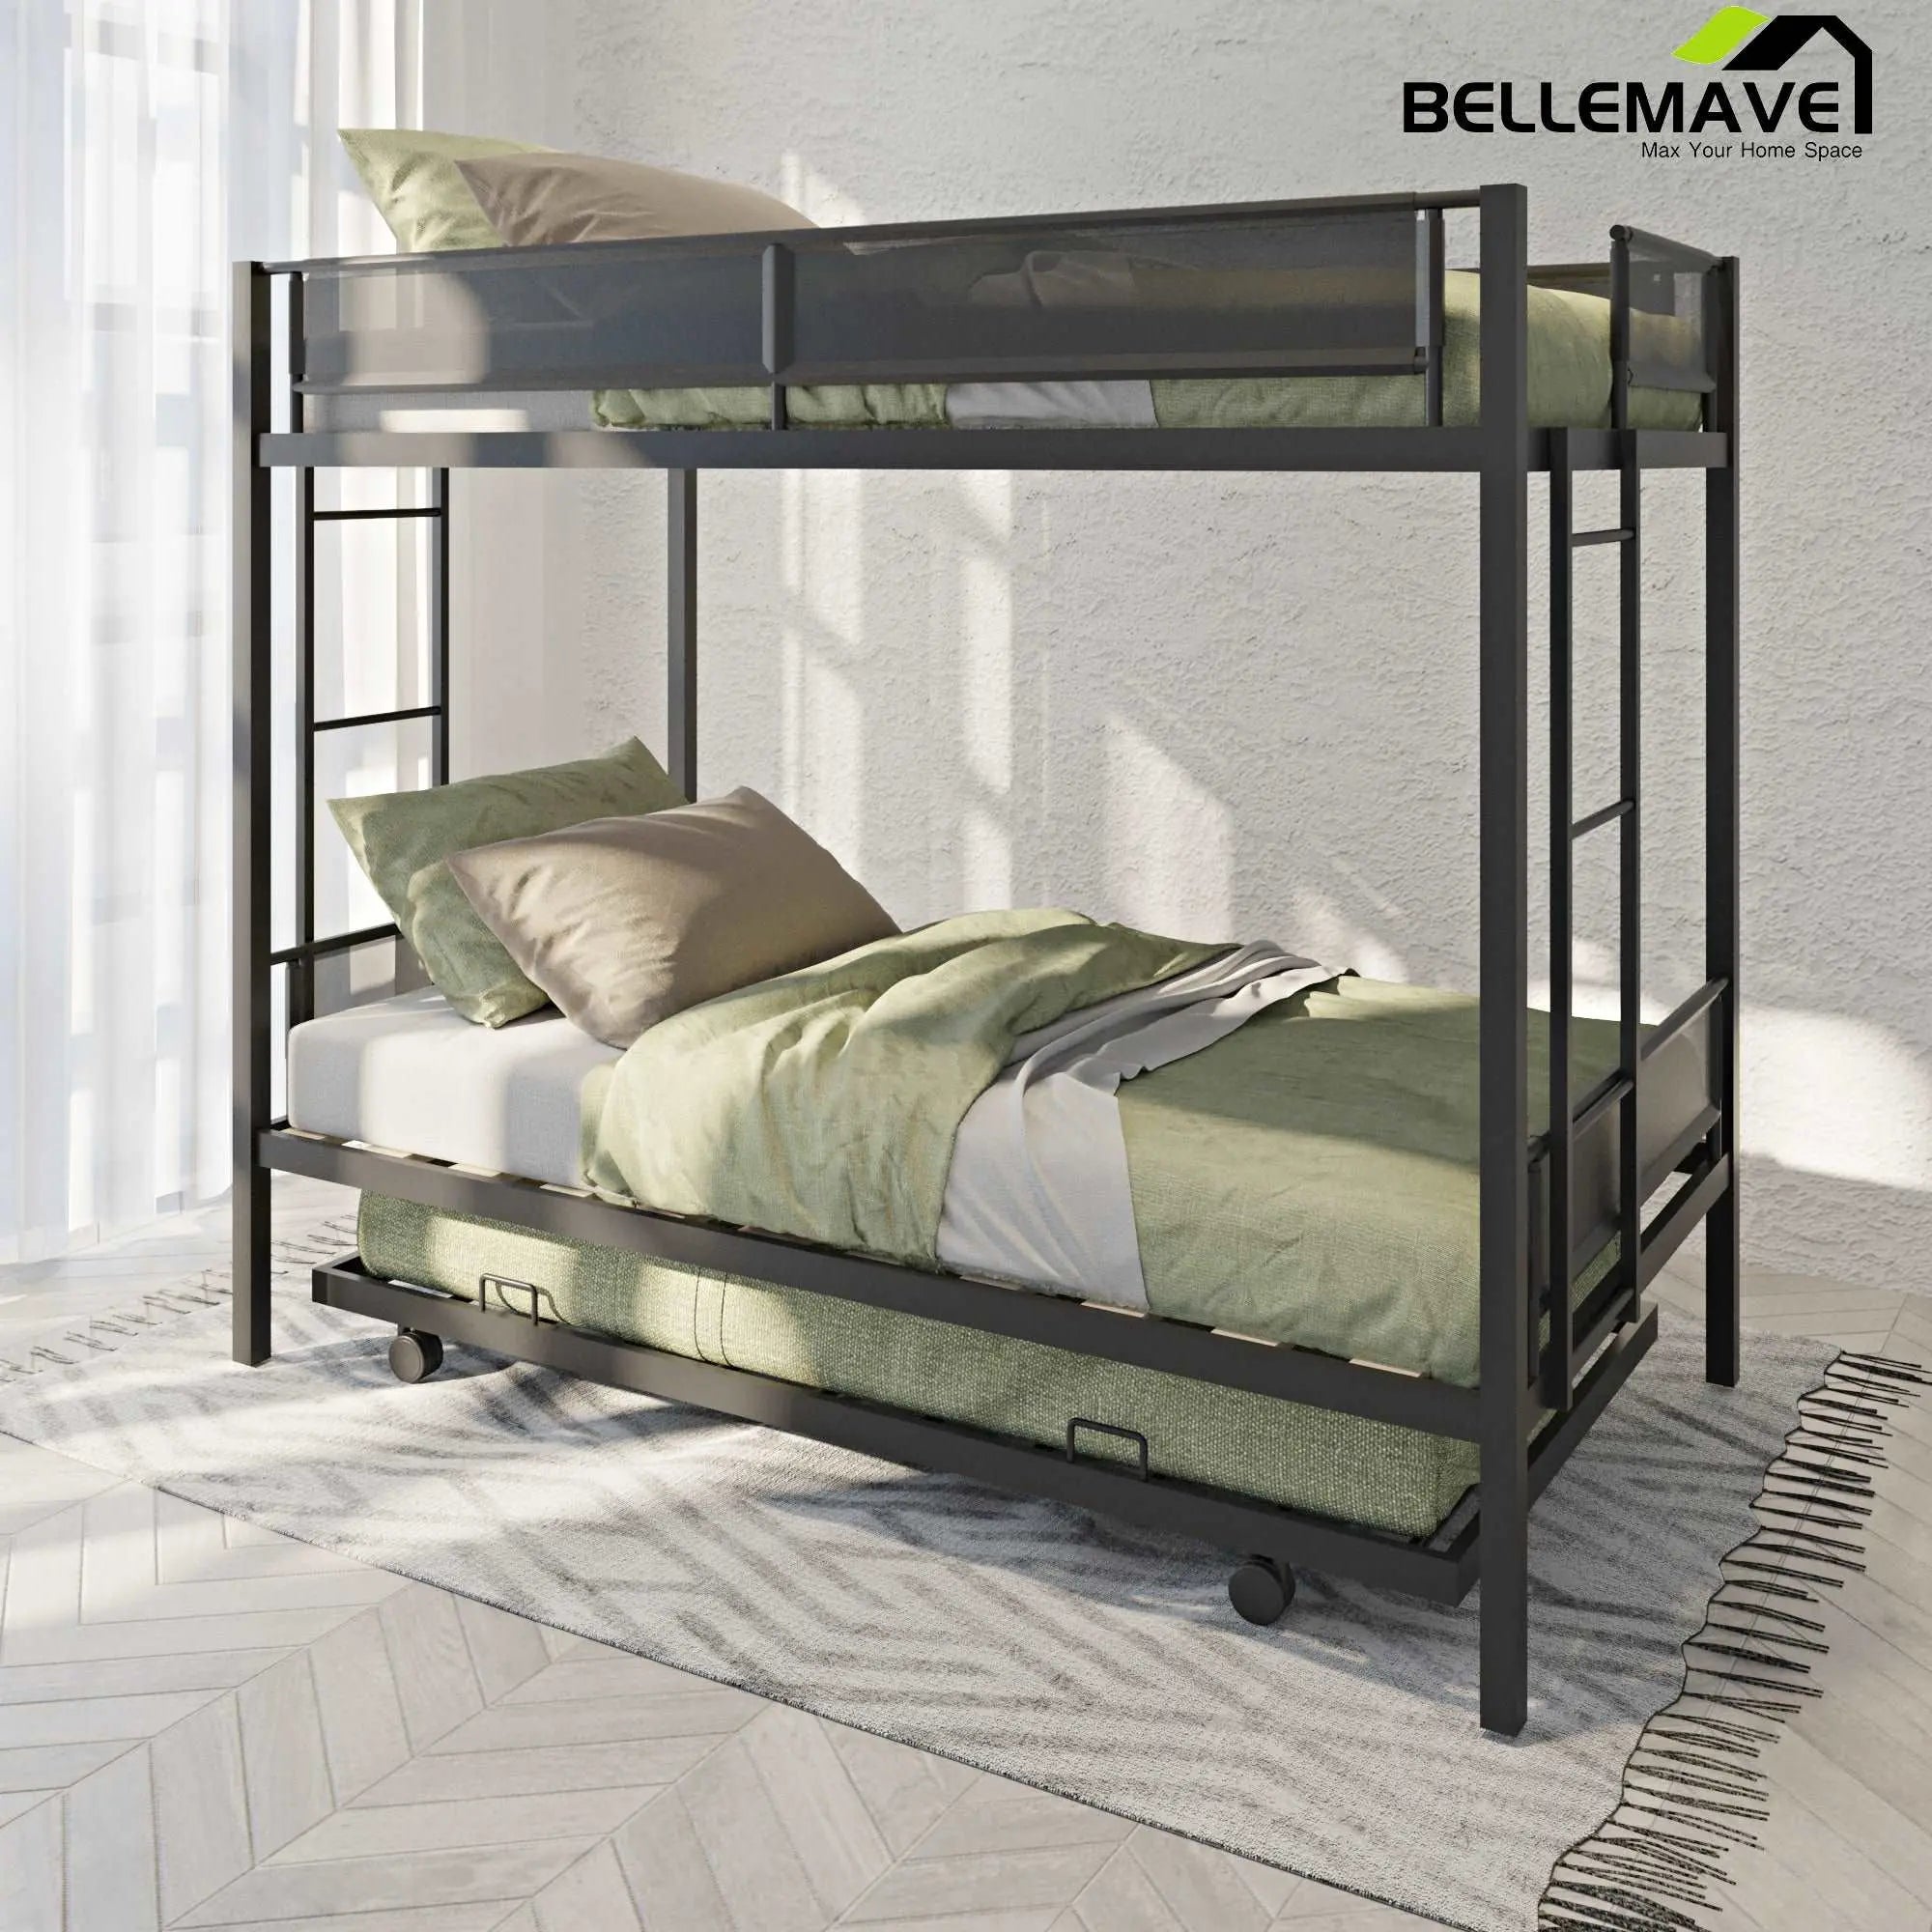 Bellemave Twin over twin bunk bed with trundle - Bellemave